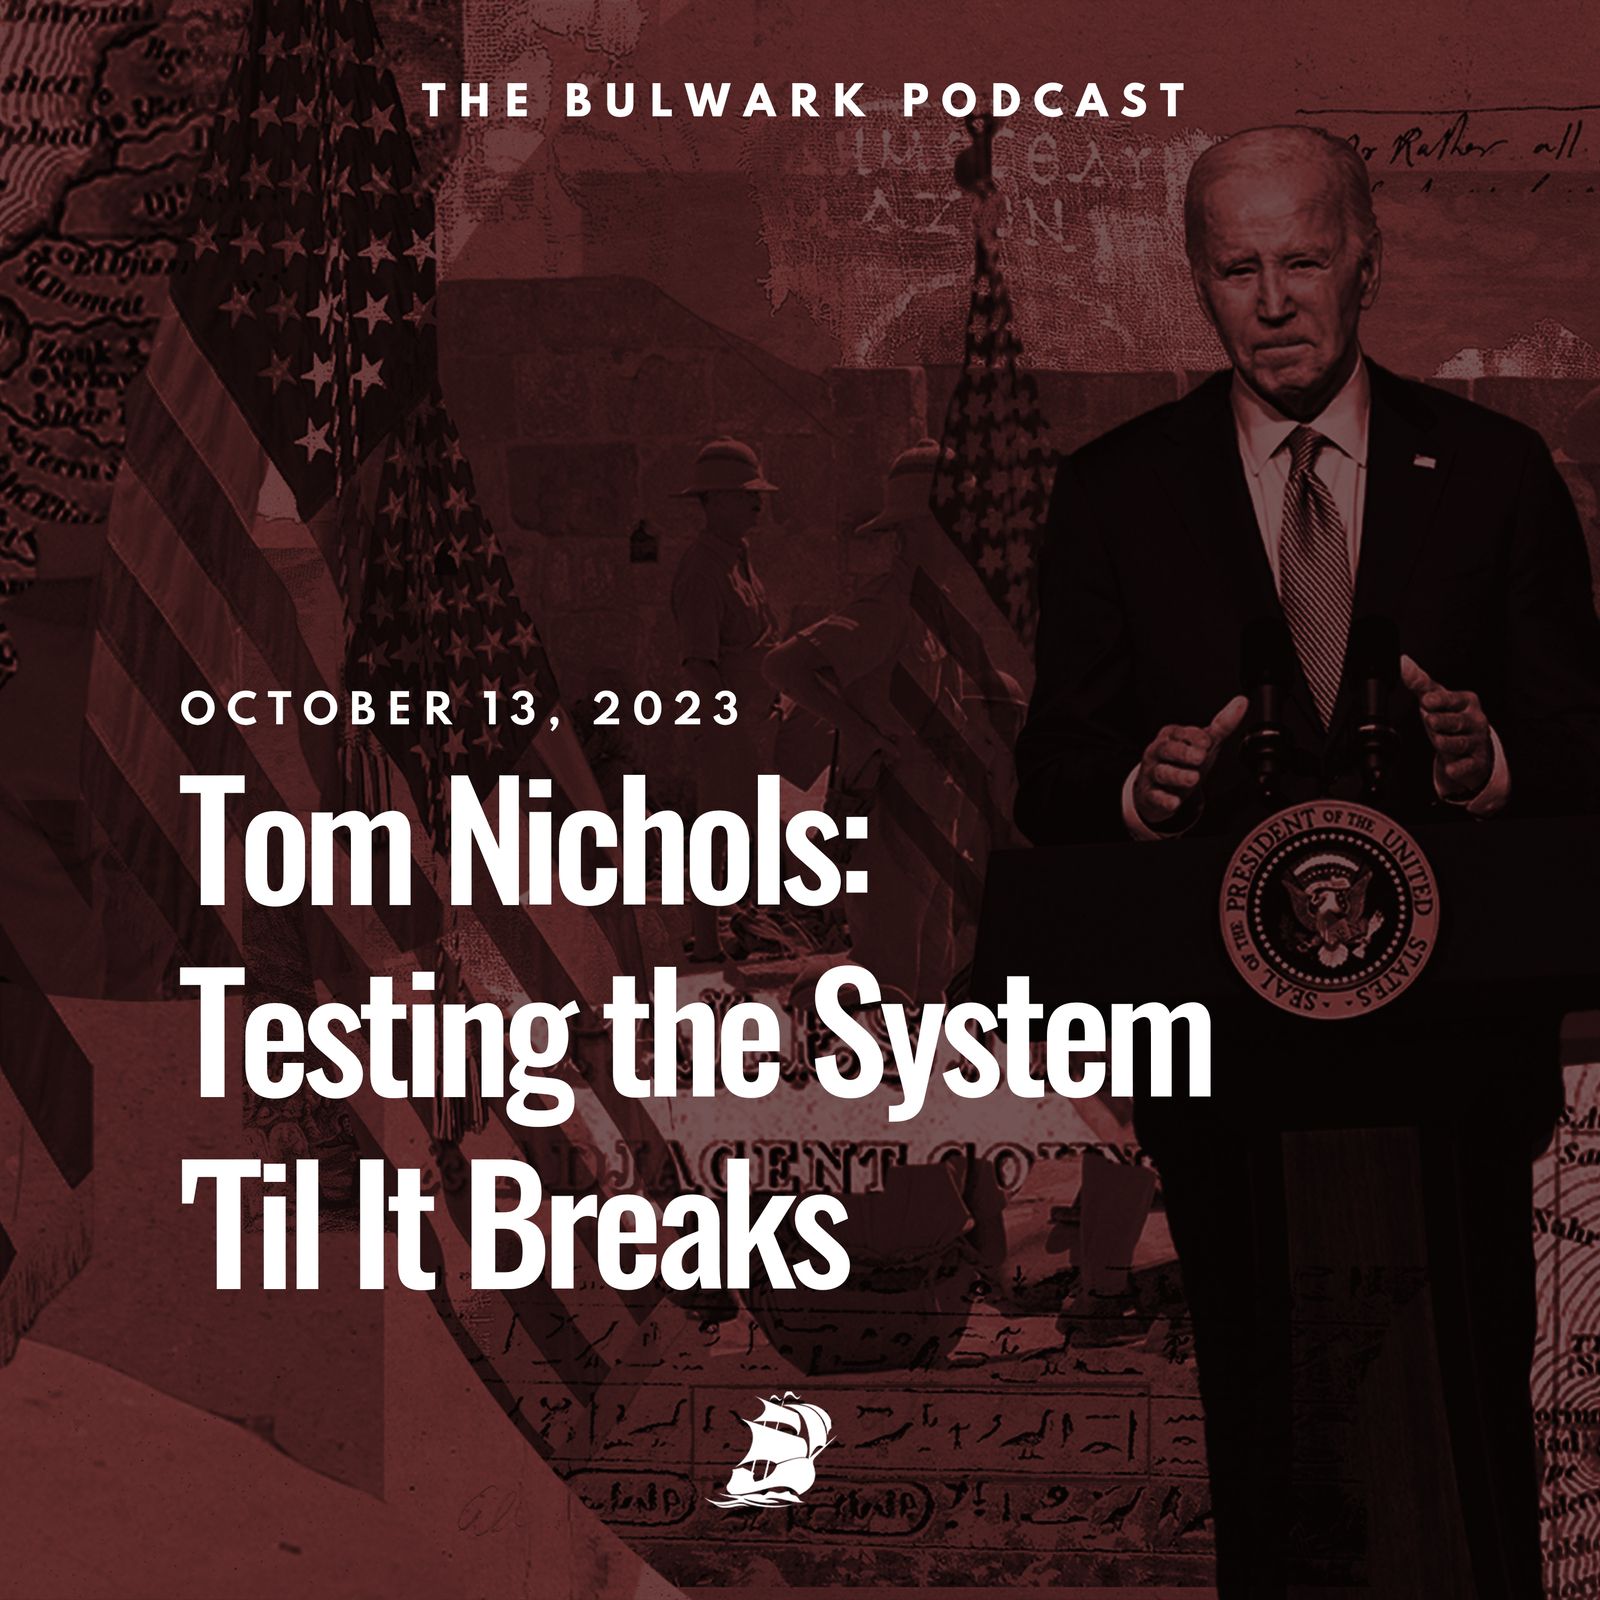 Tom Nichols: Testing the System 'Til It Breaks by The Bulwark Podcast